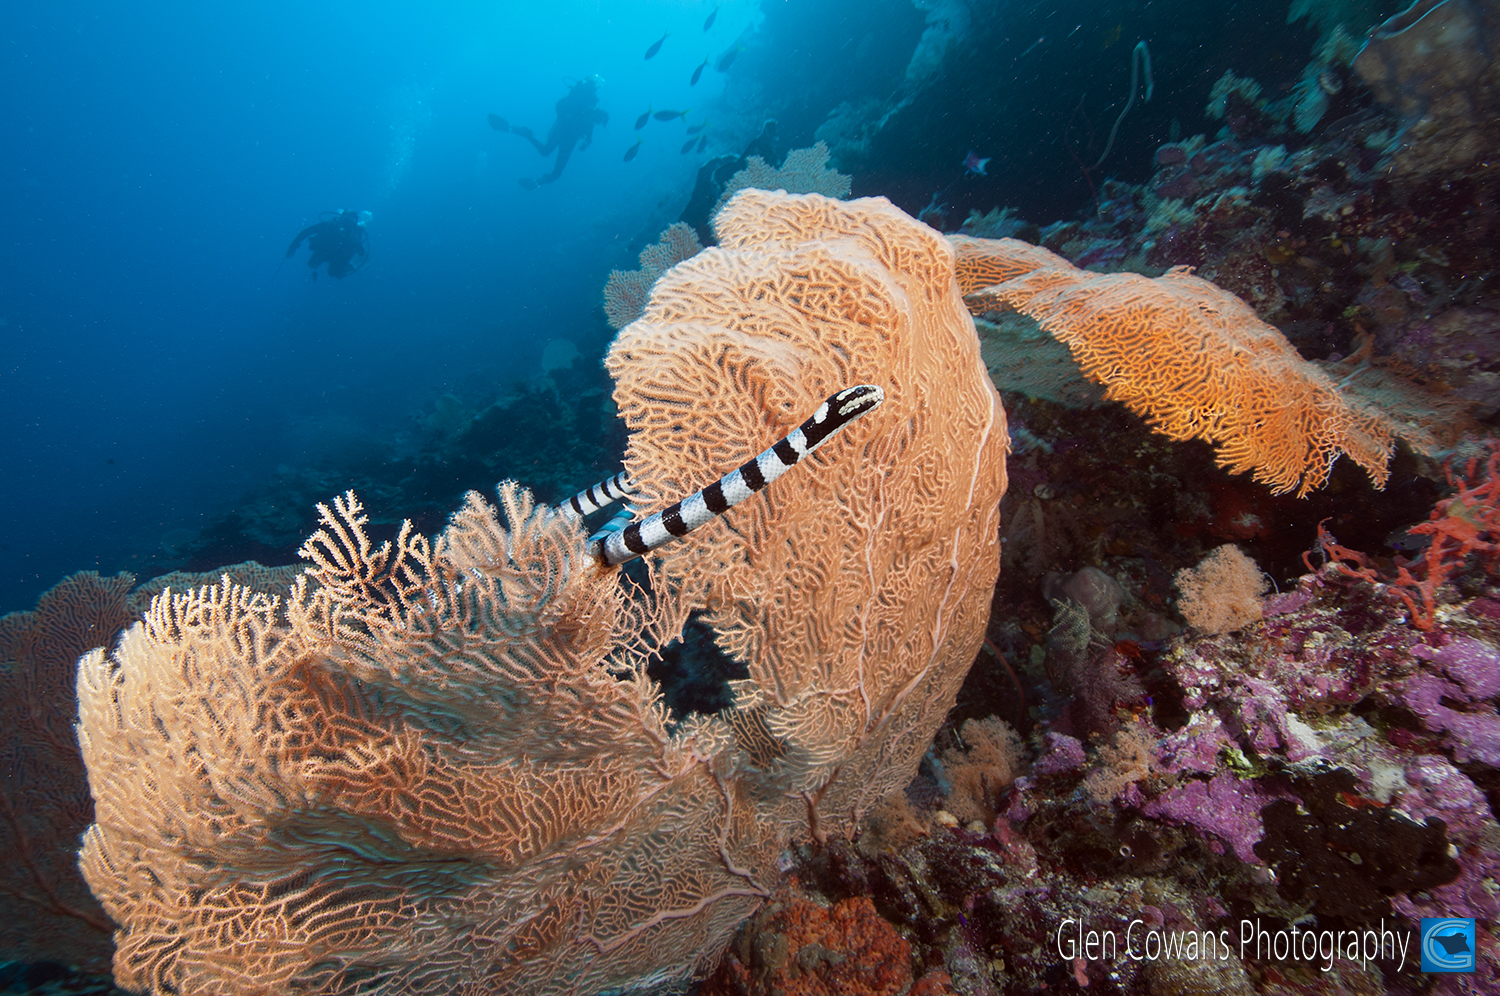 Banded sea snakes are commonly seen on most dives